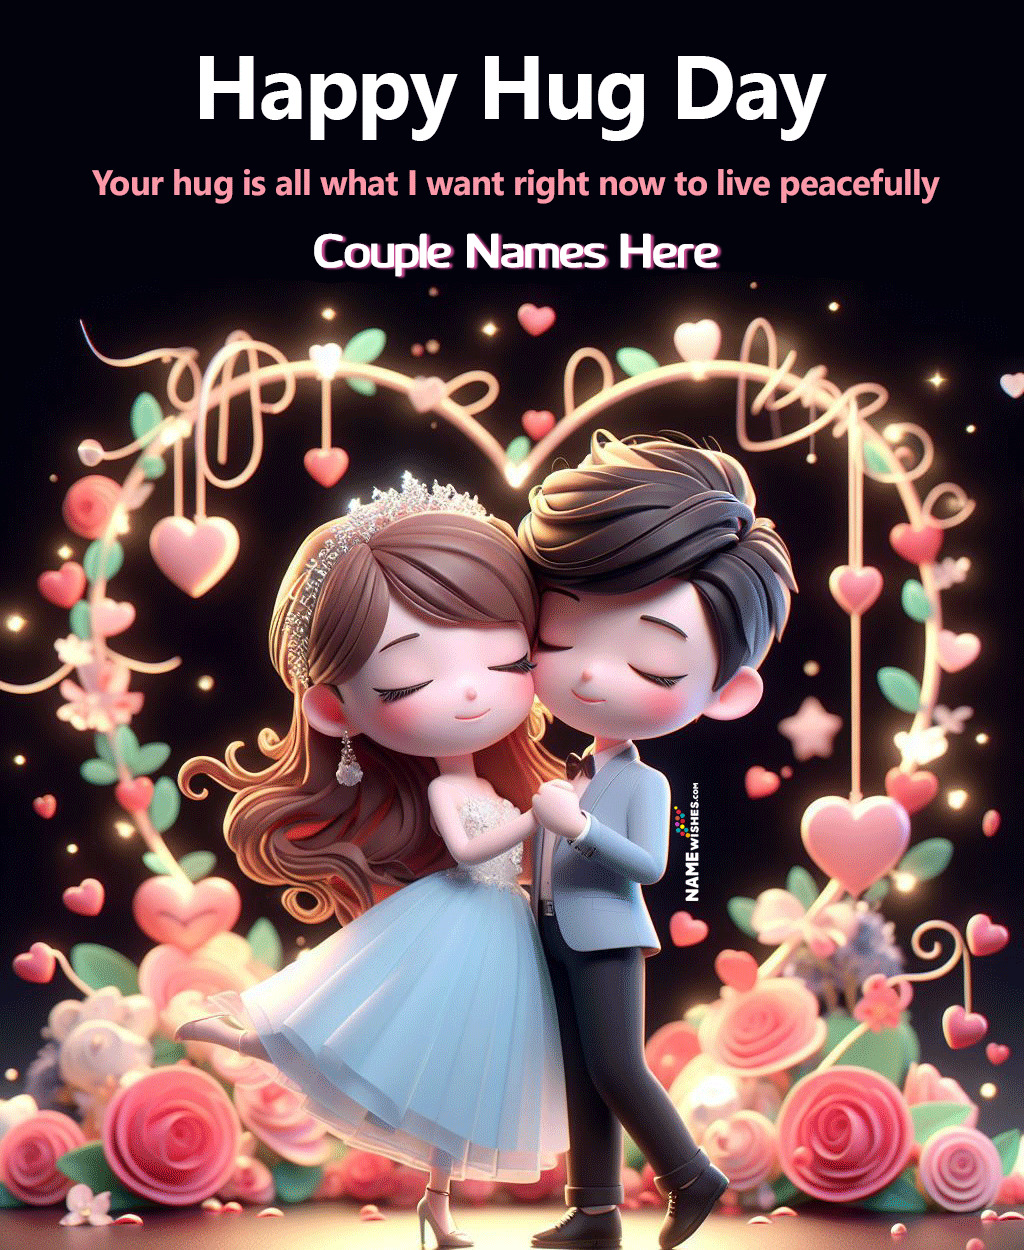 Hug Day Quotes Wishes Messages and Greetings